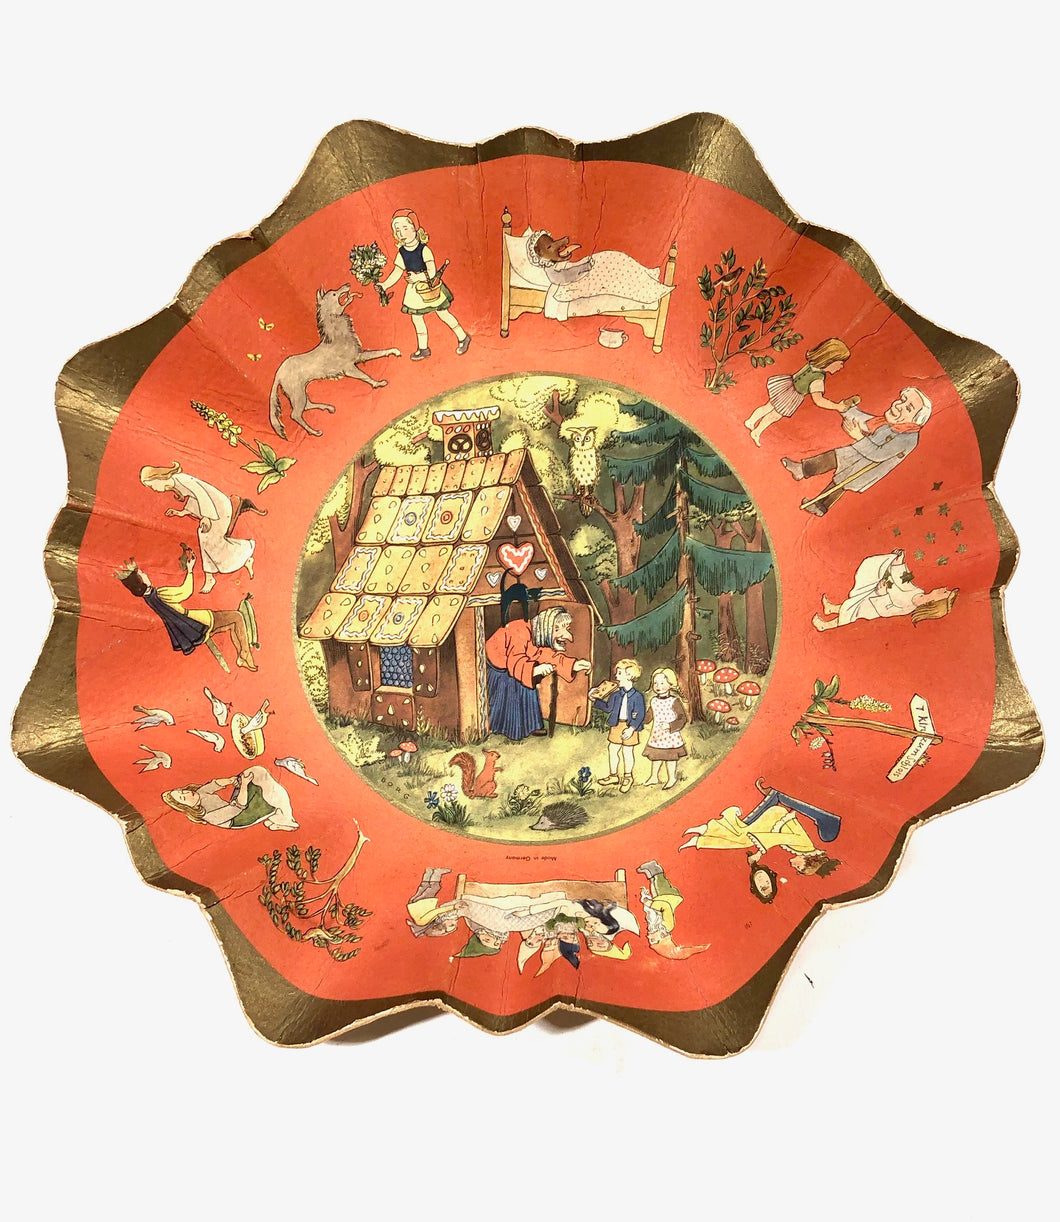 Fairytale Decorative Paper Plate, Wall Hanging, Hansel and Gretel, Mother Goose Etc. || Made in Germany